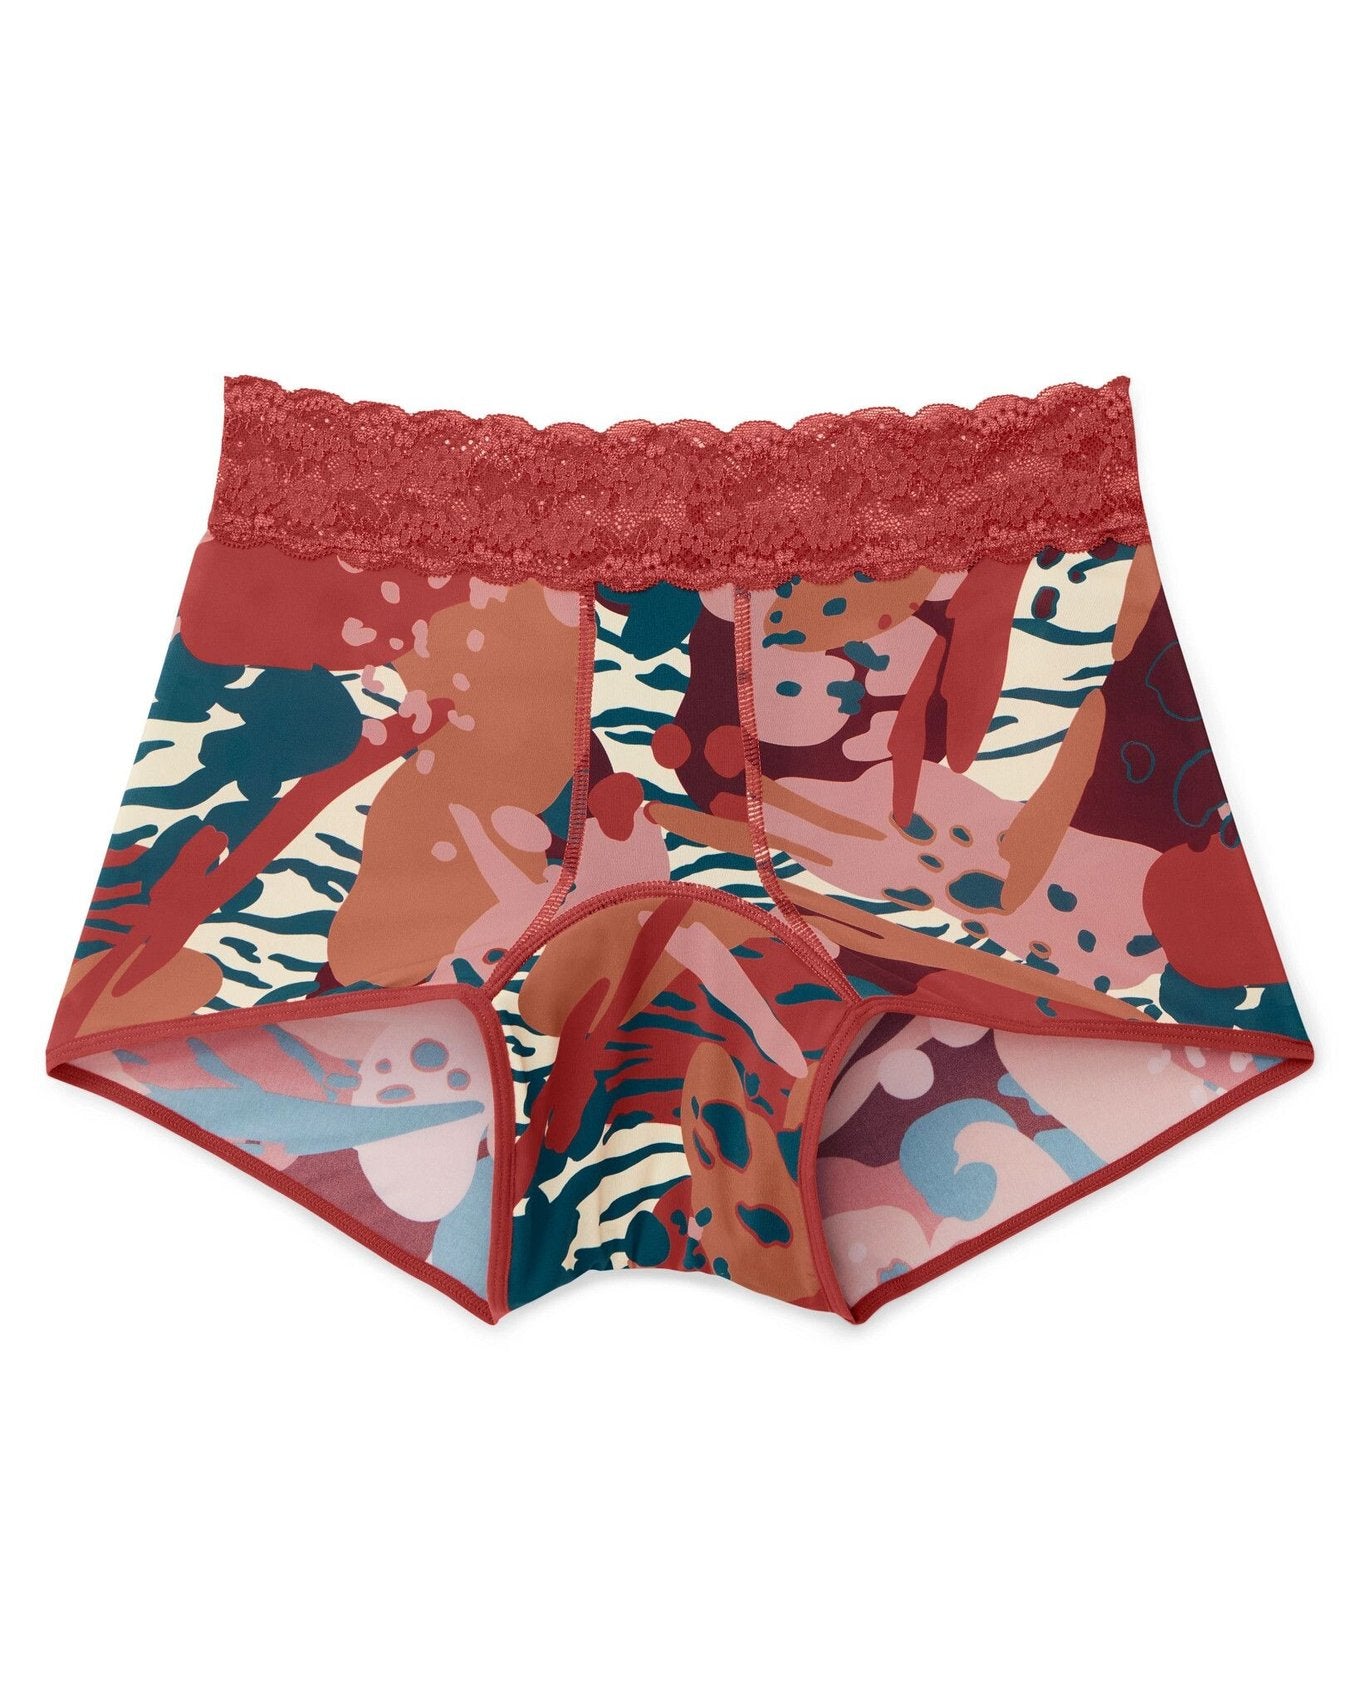 Emily Shortie Floral Red Plus Period Panties, 0X-4X